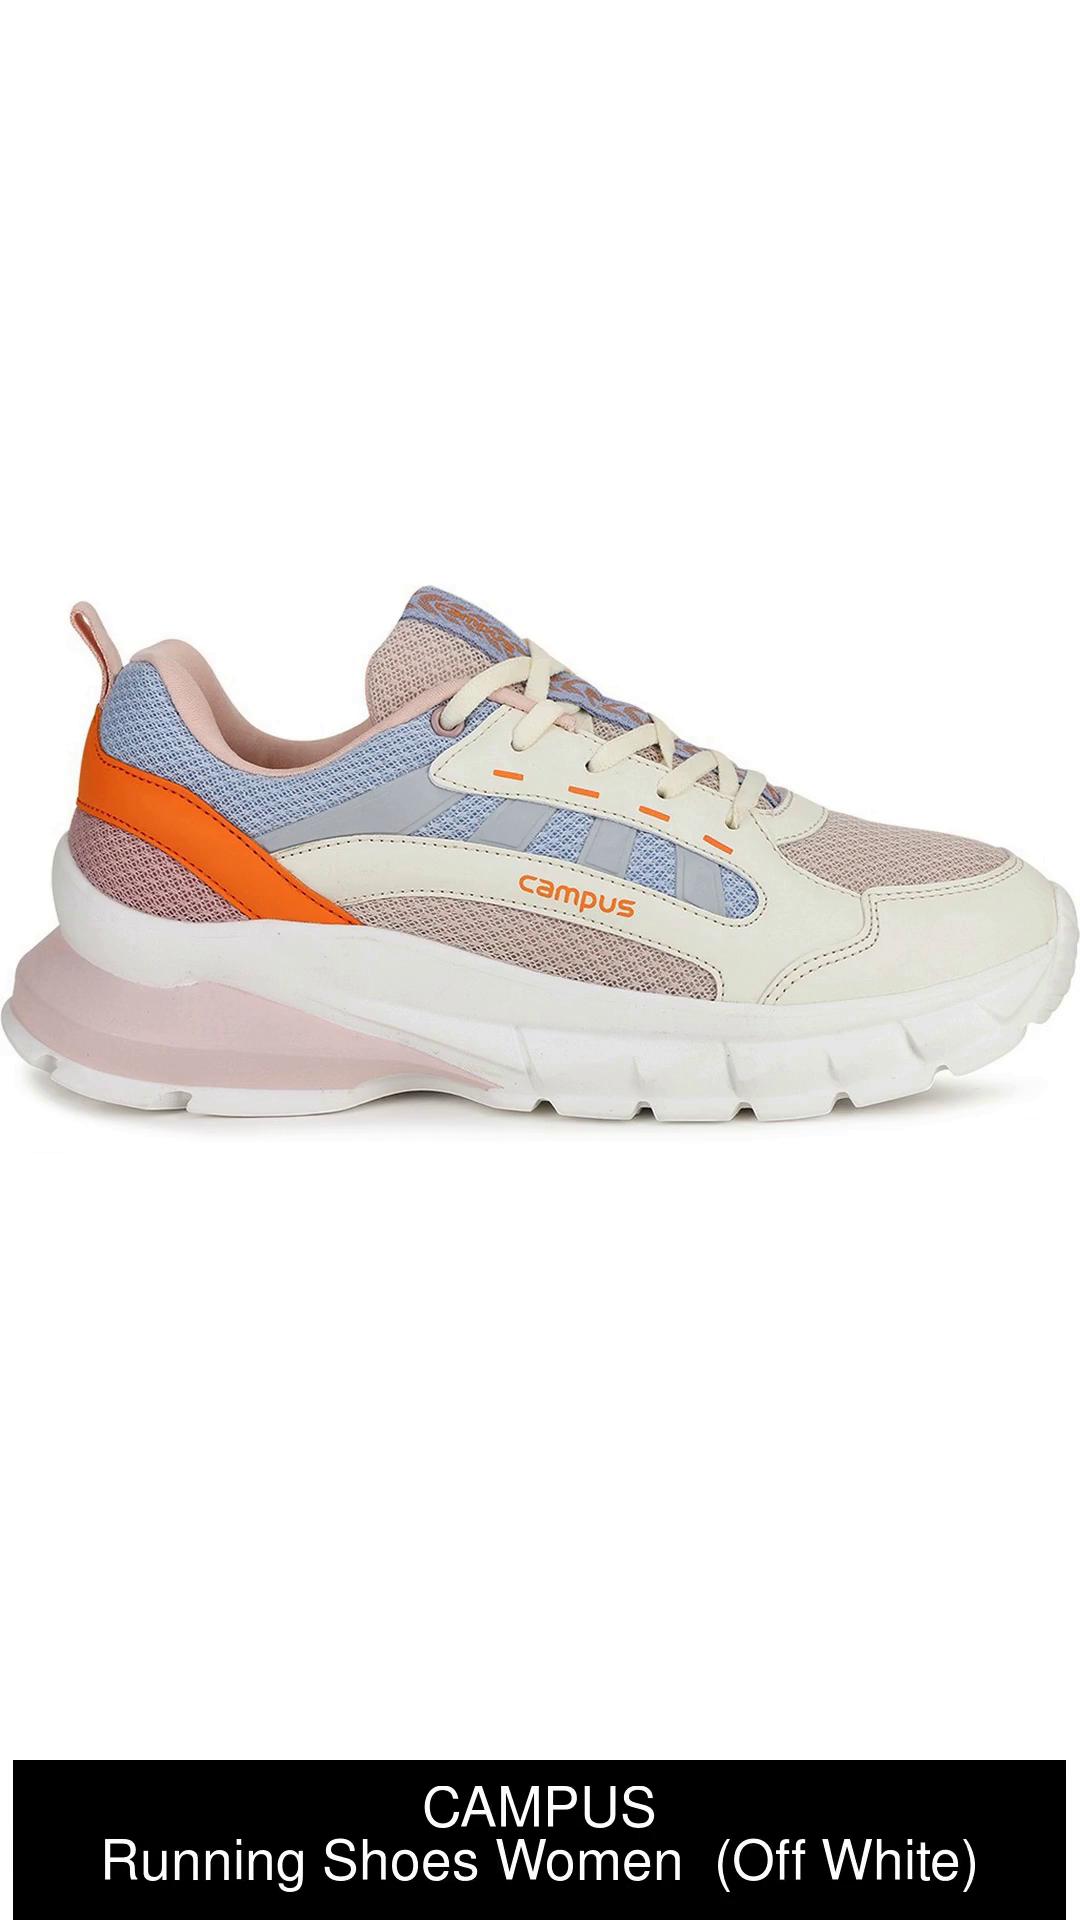 CAMPUS BLISS Sneakers For Women - Buy CAMPUS BLISS Sneakers For Women  Online at Best Price - Shop Online for Footwears in India